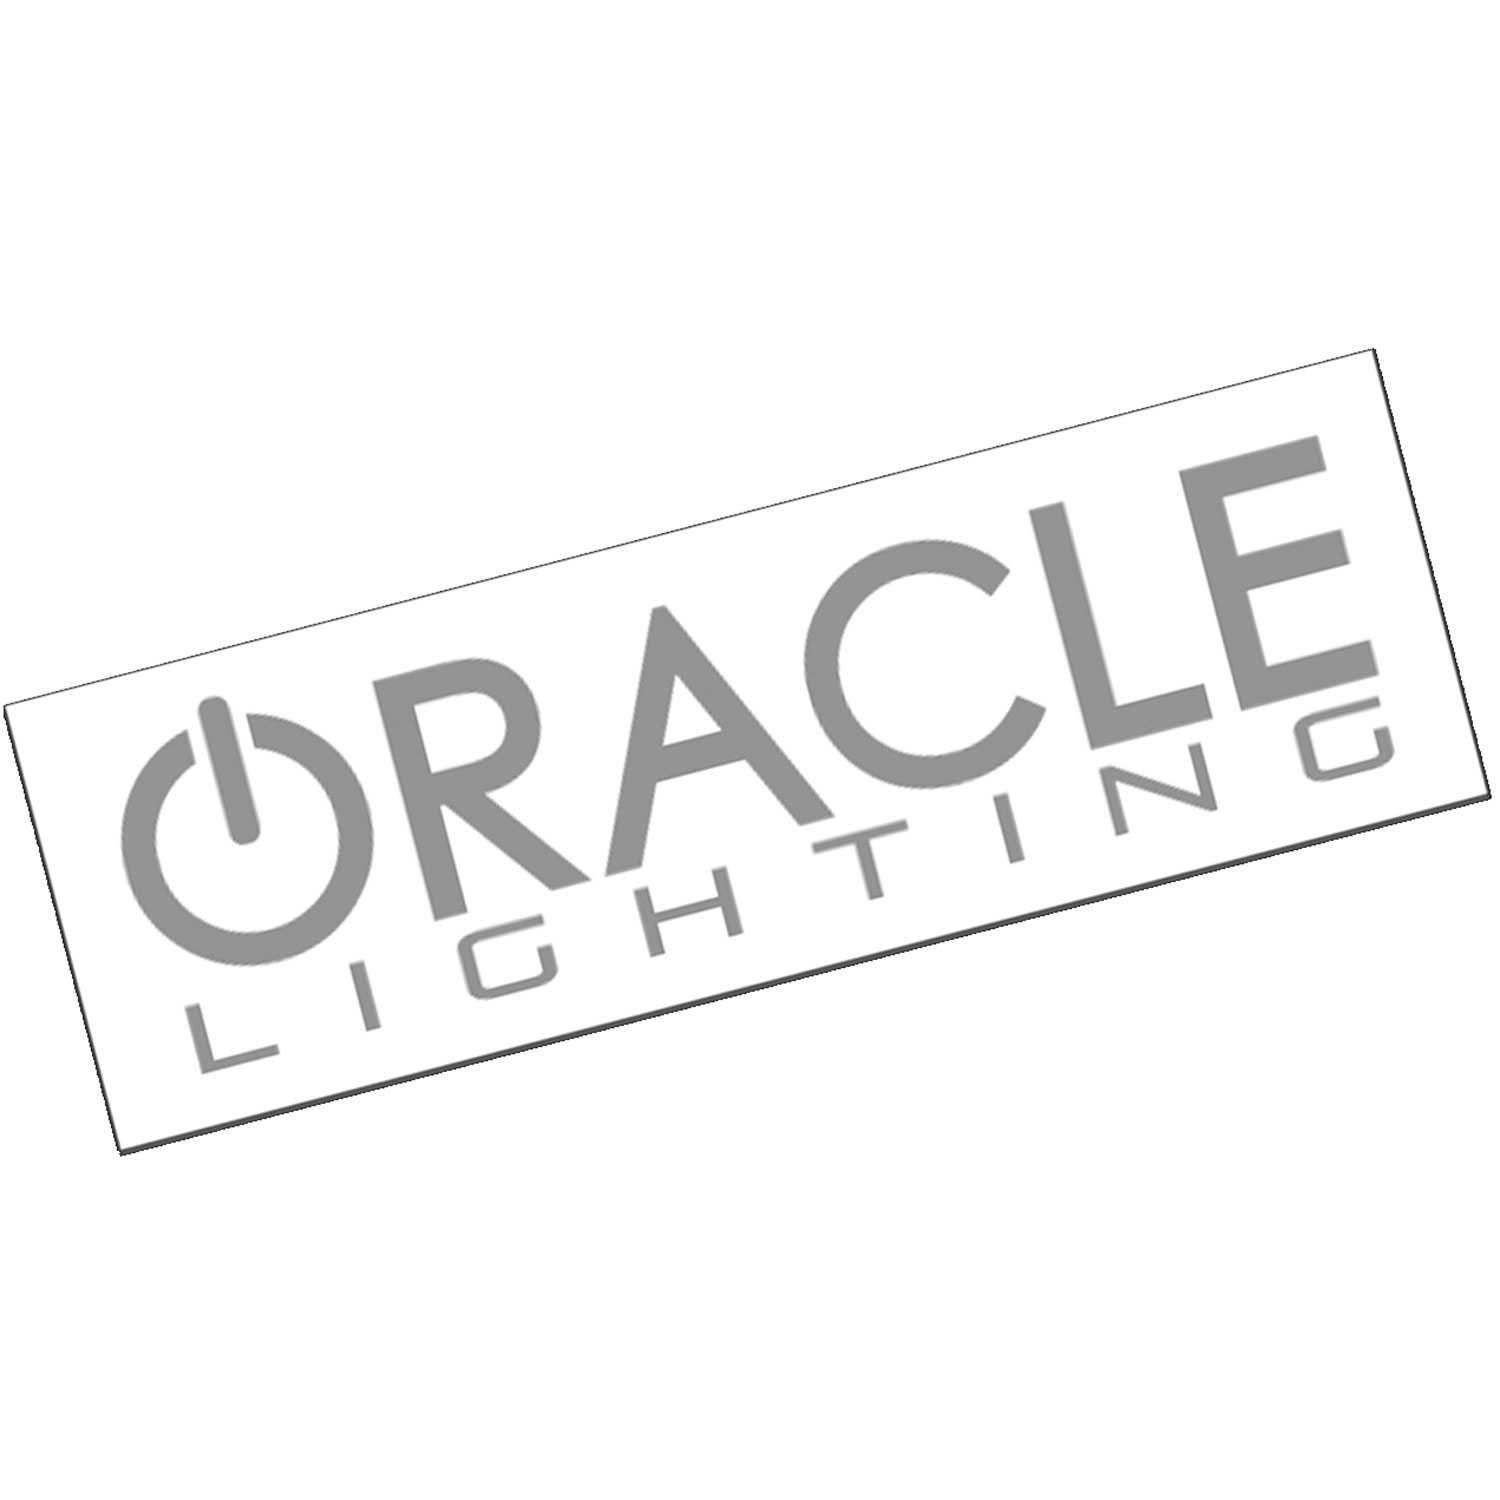 ORACLE Lighting Decal - Silver